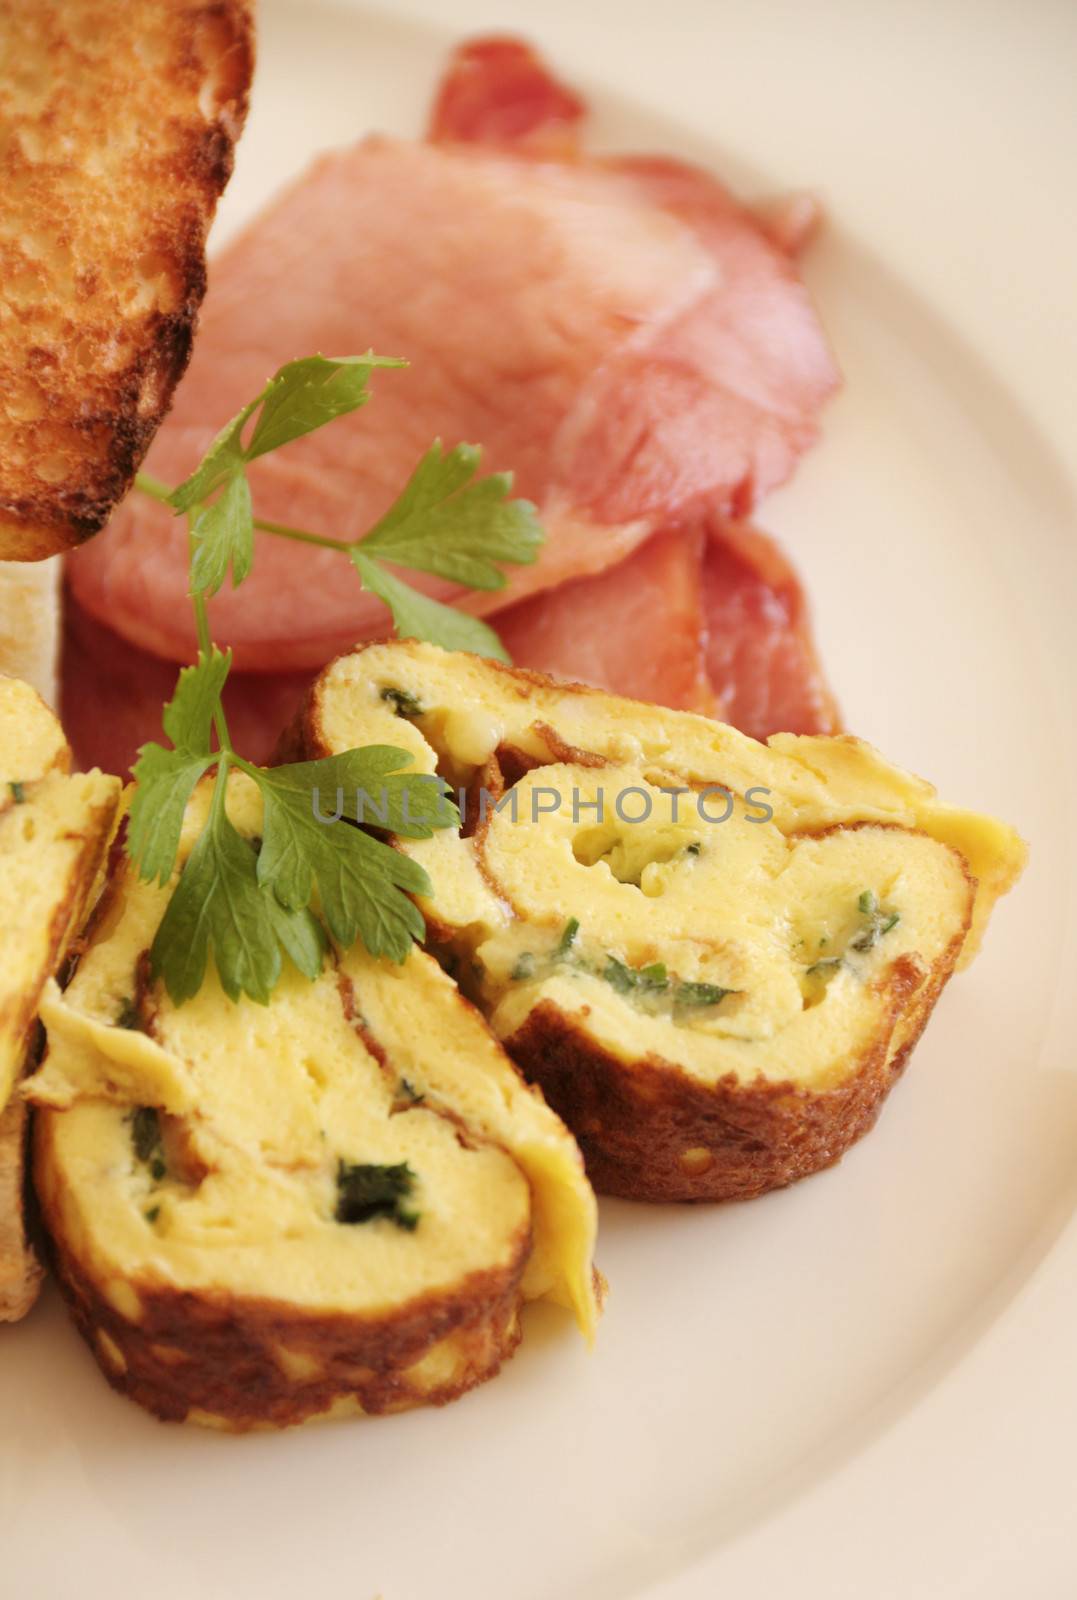 Delicious sliced rolled omelette with bacon and Turkish bread with parsley.